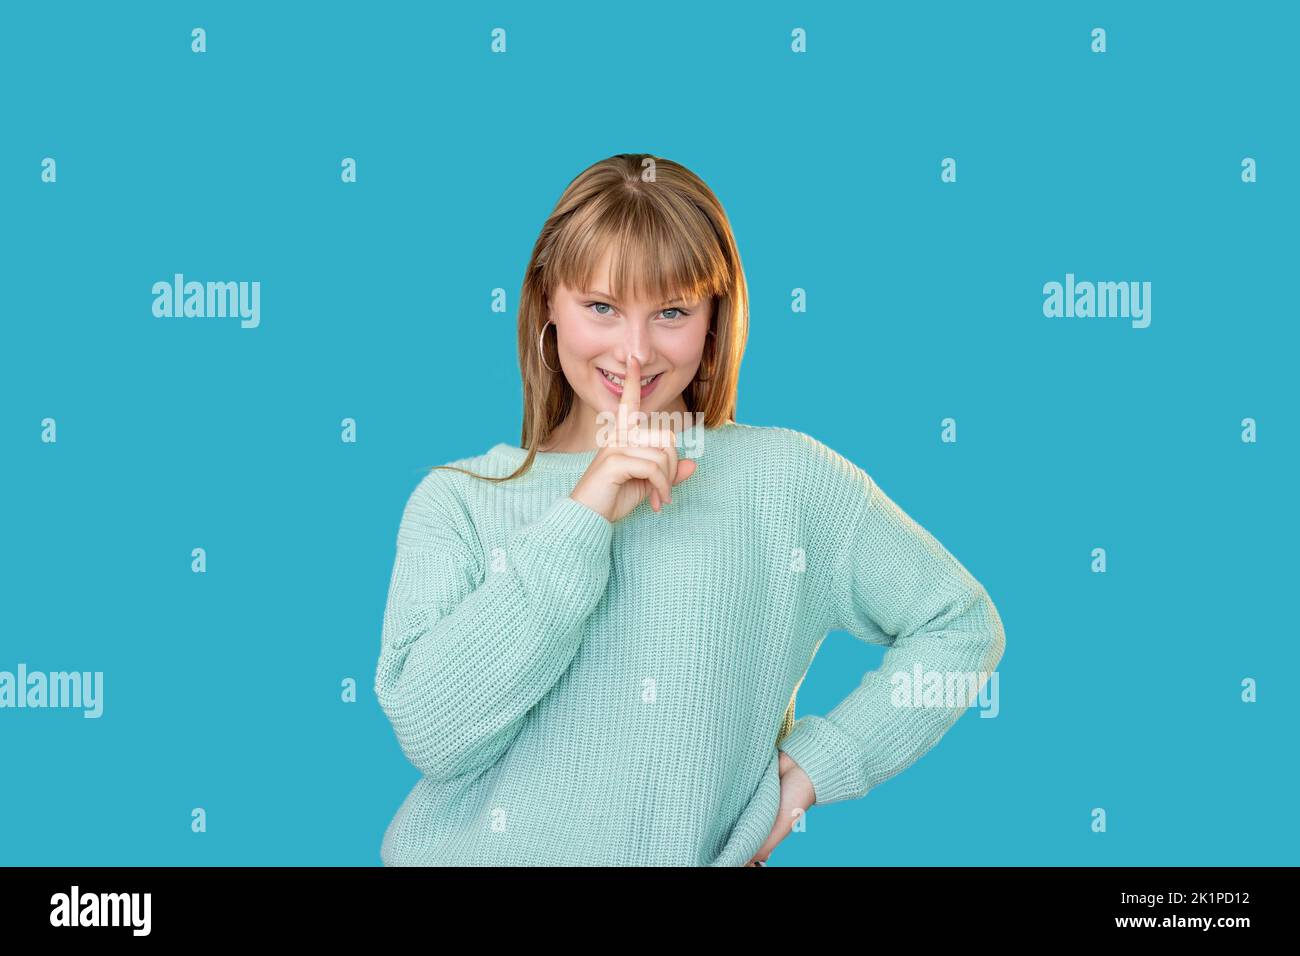 Female secret. Hush gesture. Special offer. Surprise opportunity. Portrait of amused playful woman in sweater showing shhh with finger at mouth isolat Stock Photo